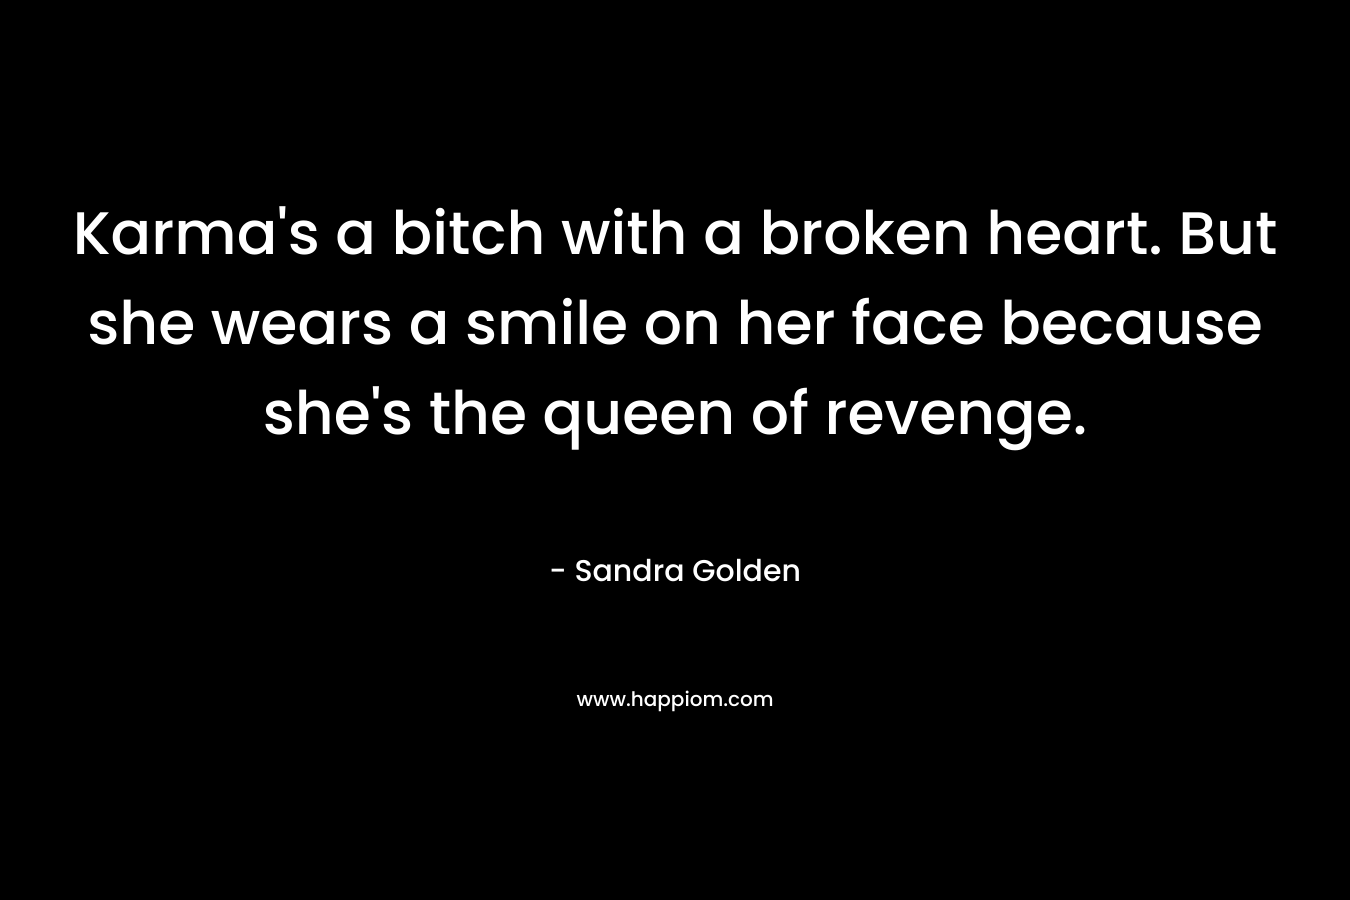 Karma’s a bitch with a broken heart. But she wears a smile on her face because she’s the queen of revenge. – Sandra Golden